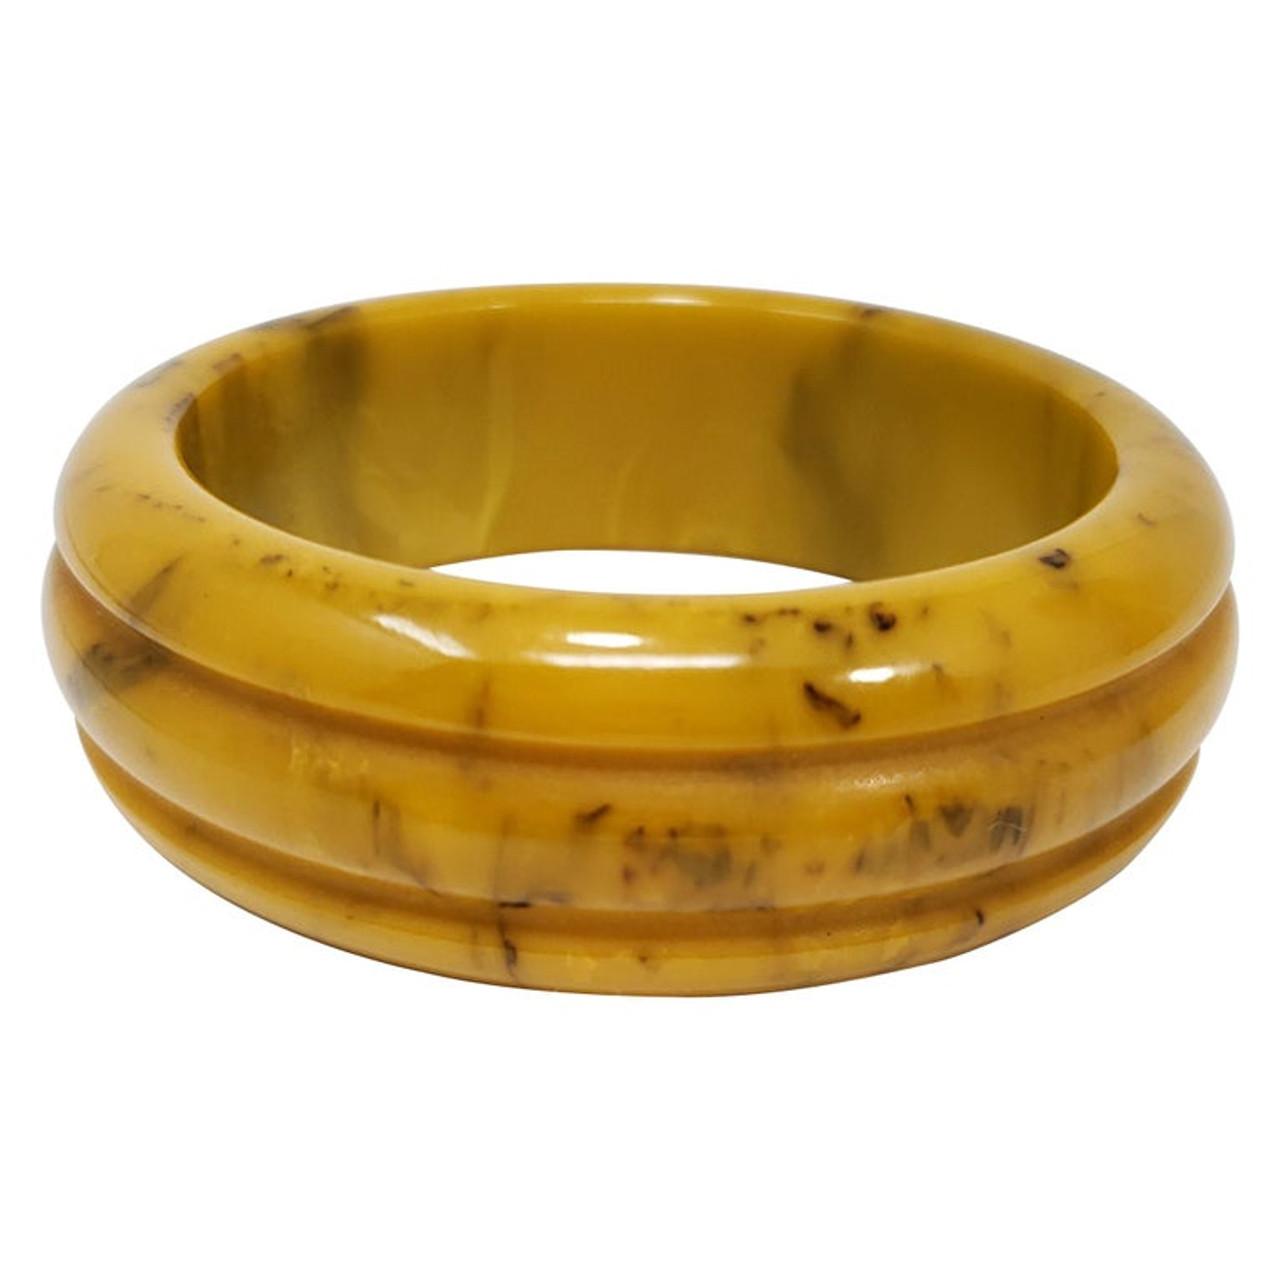 6) VINTAGE LAMINATED TWO COLOR BAKELITE & OTHER PLASTIC BANGLES for sale at  auction on 23rd February | Bidsquare